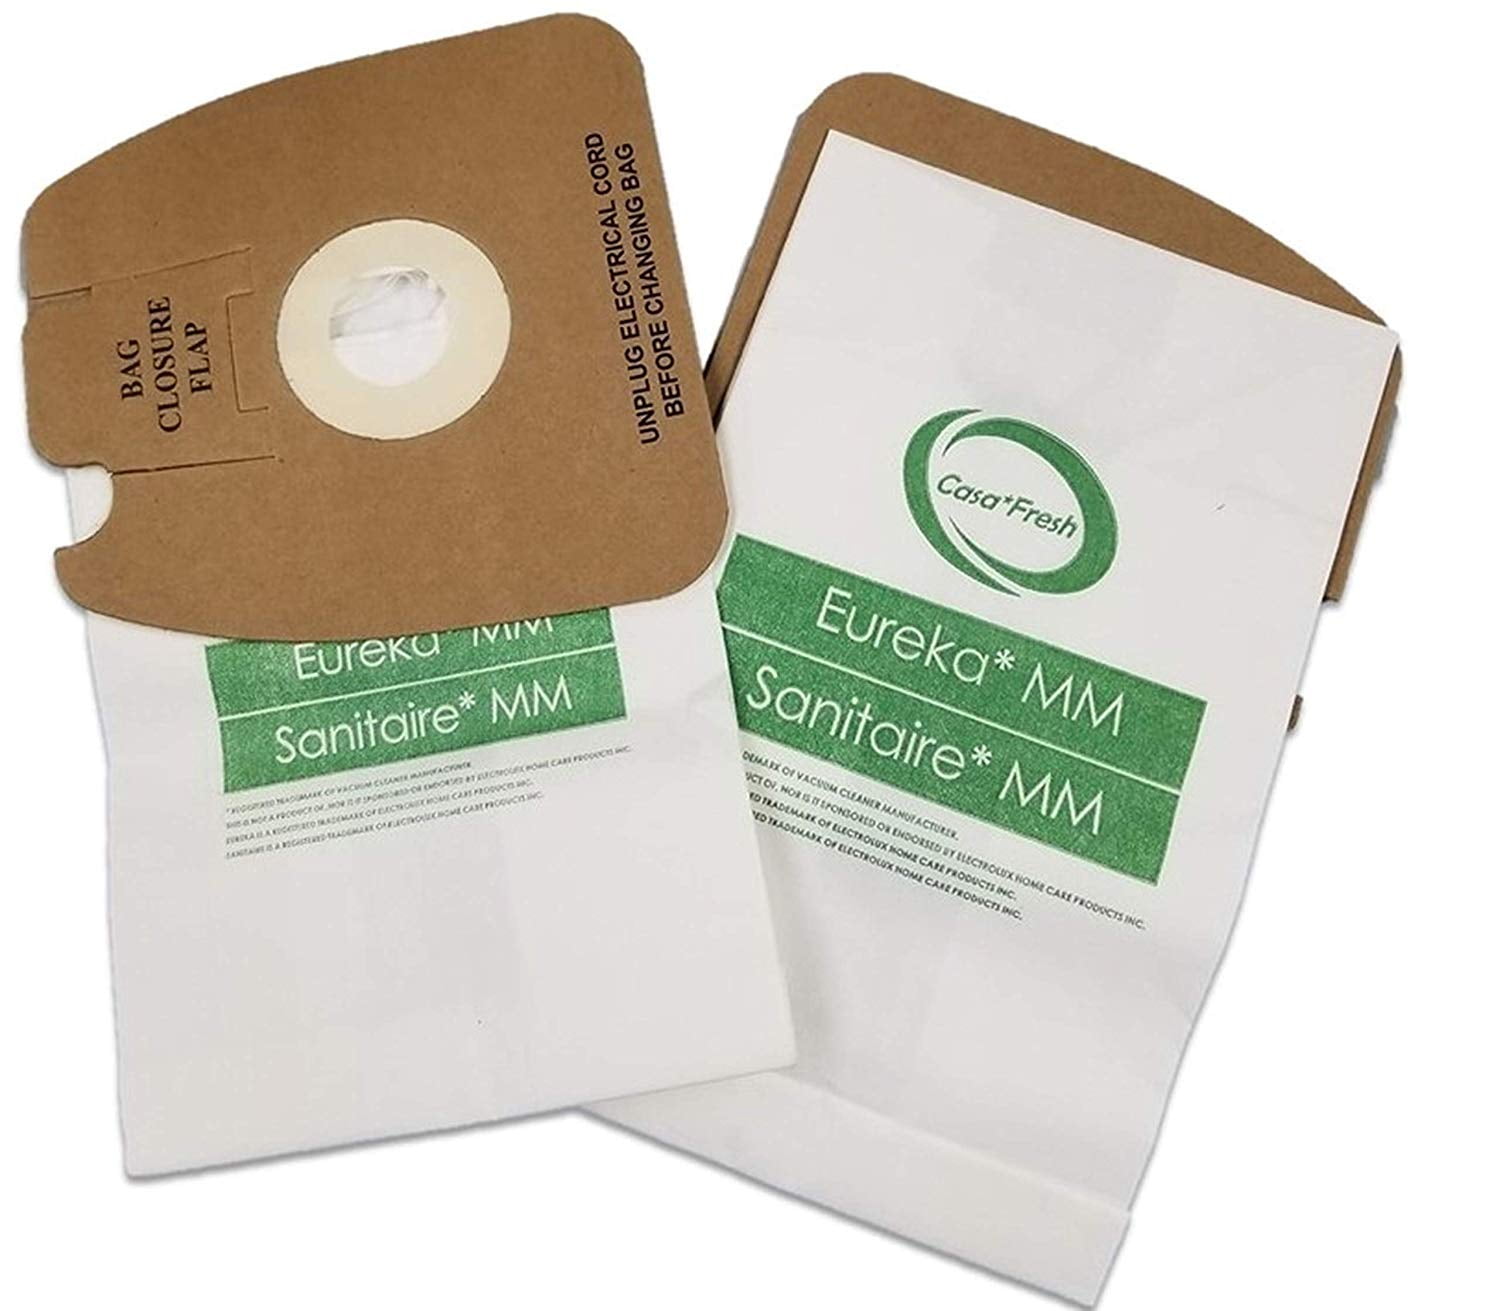 Canister Vacuum Bags for Eureka MM Mighty Mite 60295 20 BAGS 